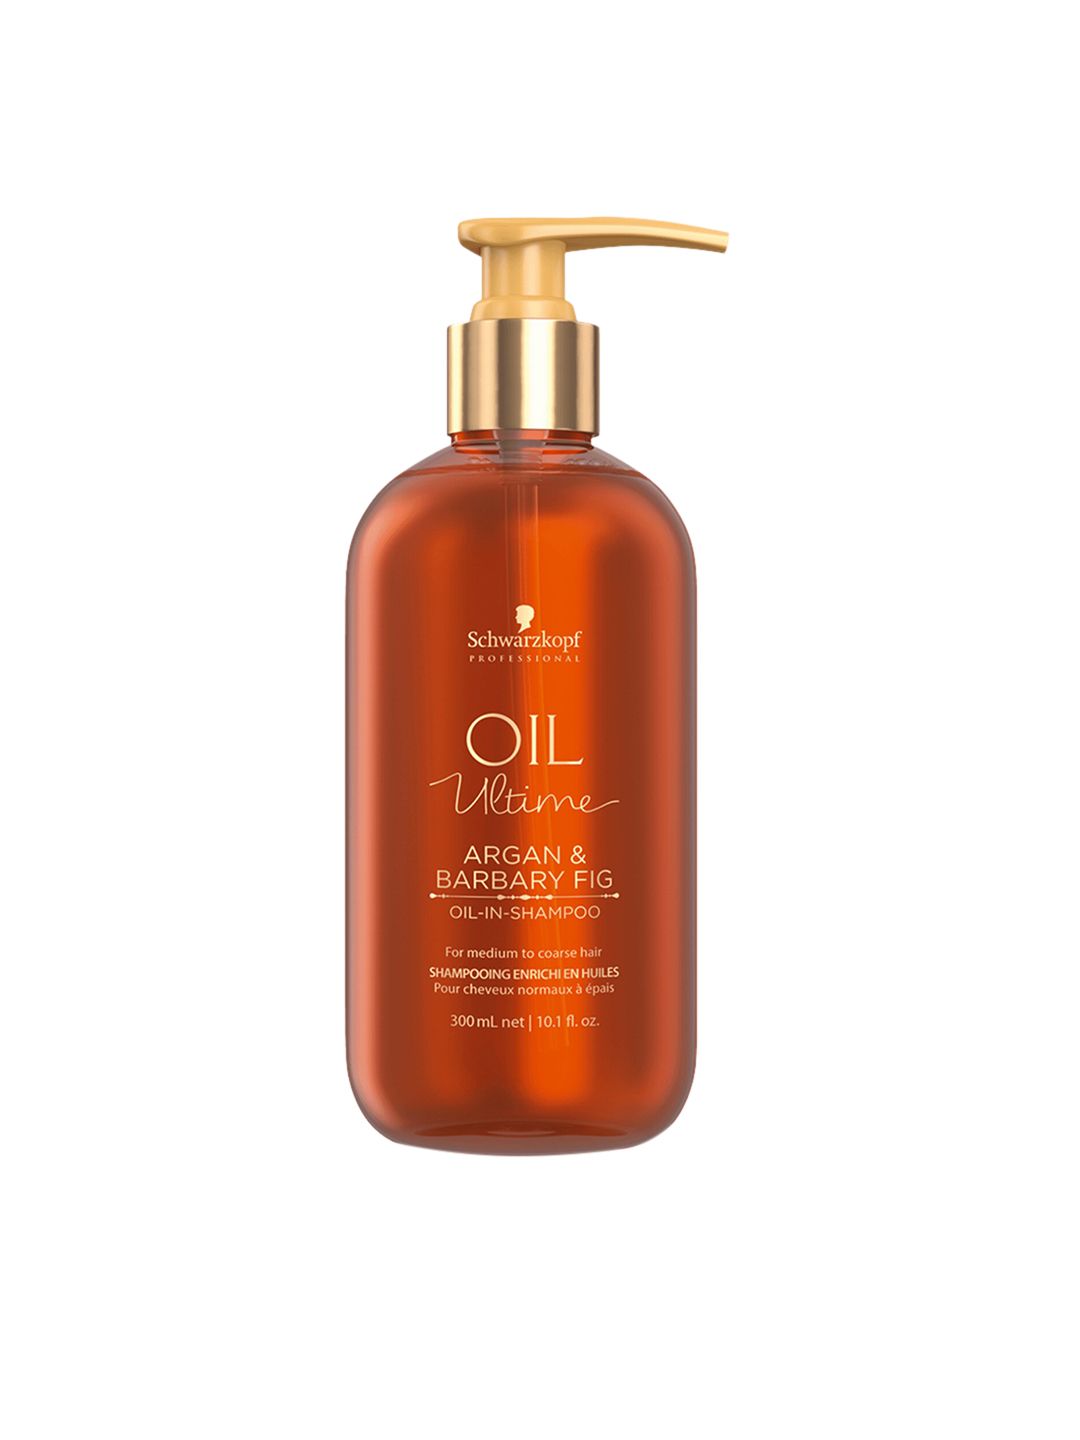 Schwarzkopf PROFESSIONAL Oil Ultime Oil-In-Shampoo with Argan and Barbary Fig Oil 300ml Price in India